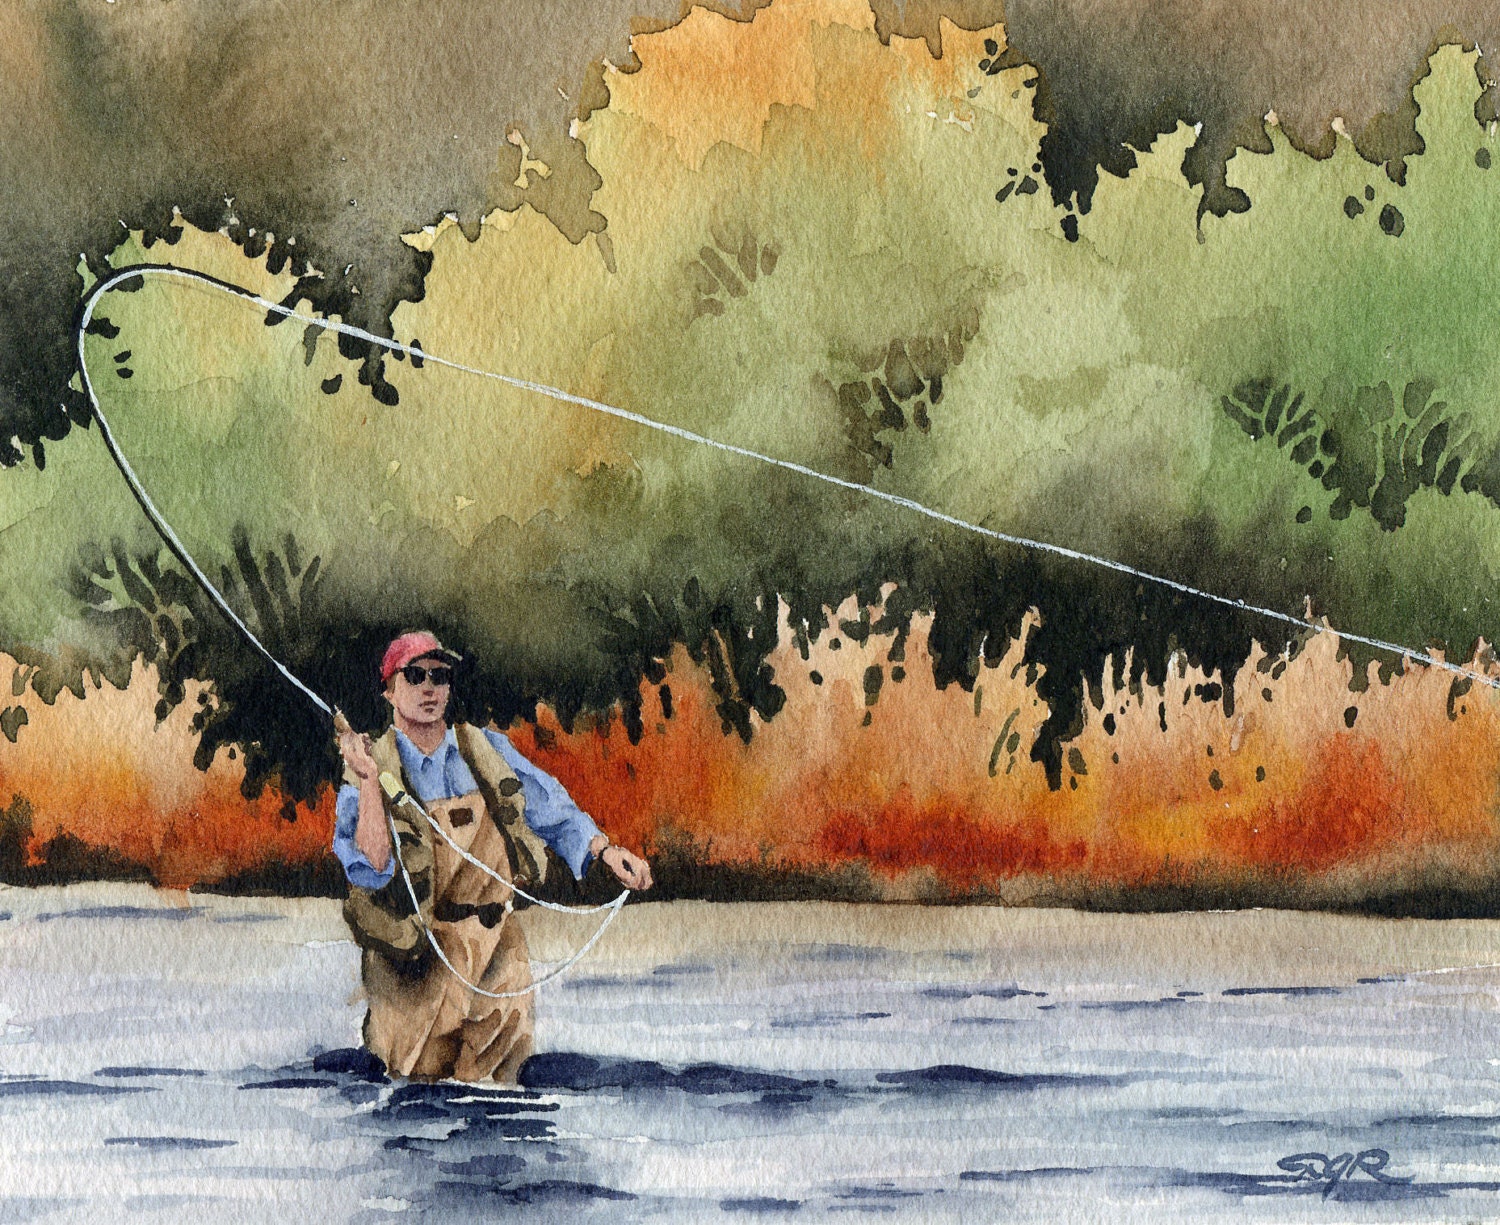 Fly Fishing Art Print hooked Up Watercolor Painting Angling Art by Artist  DJ Rogers Wall Decor 